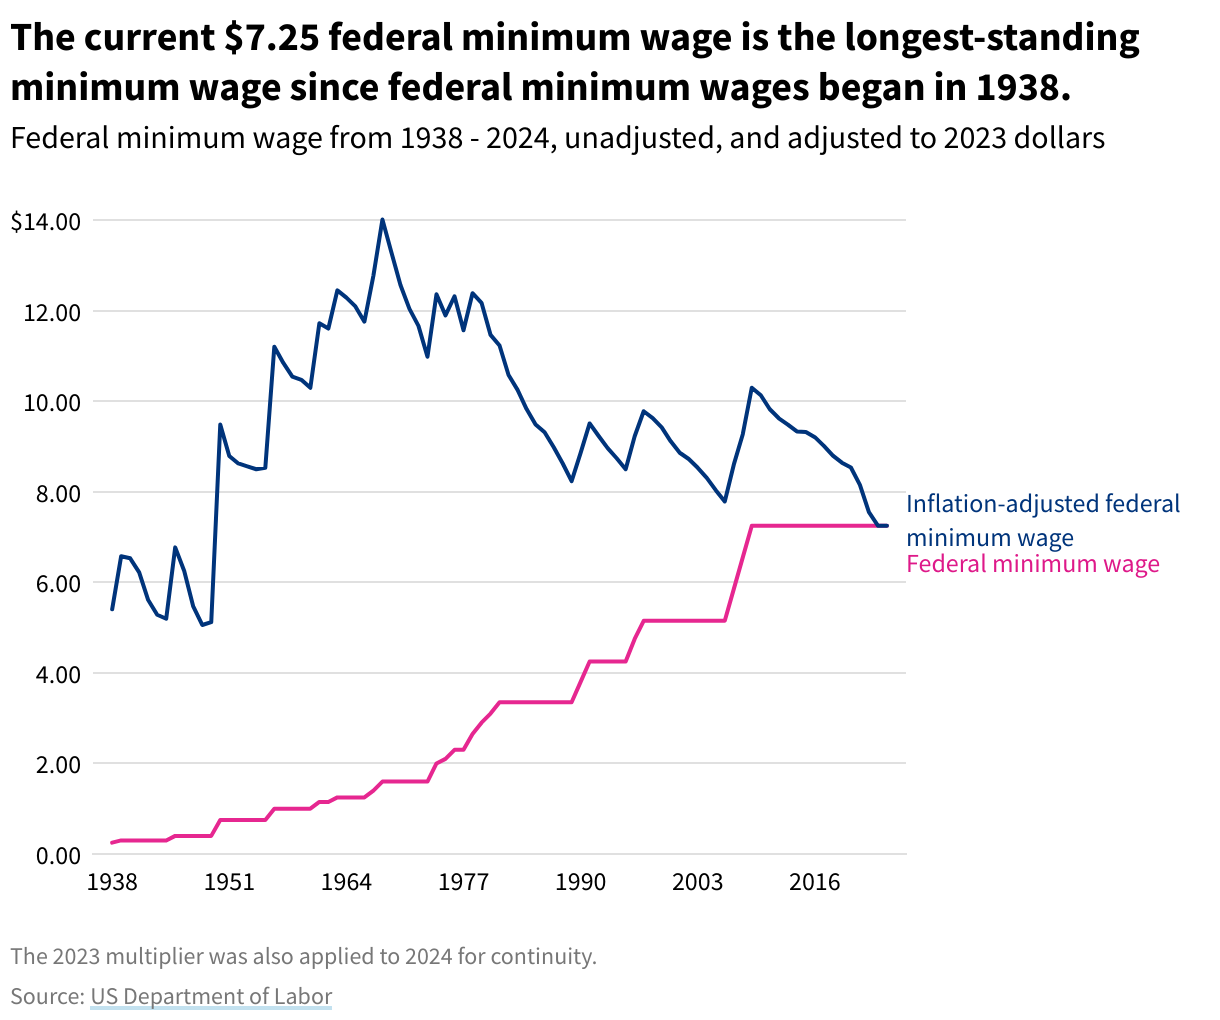 Line chart showing the minimum wage and inflation-adjusted minimum wage from 1938 - 2024